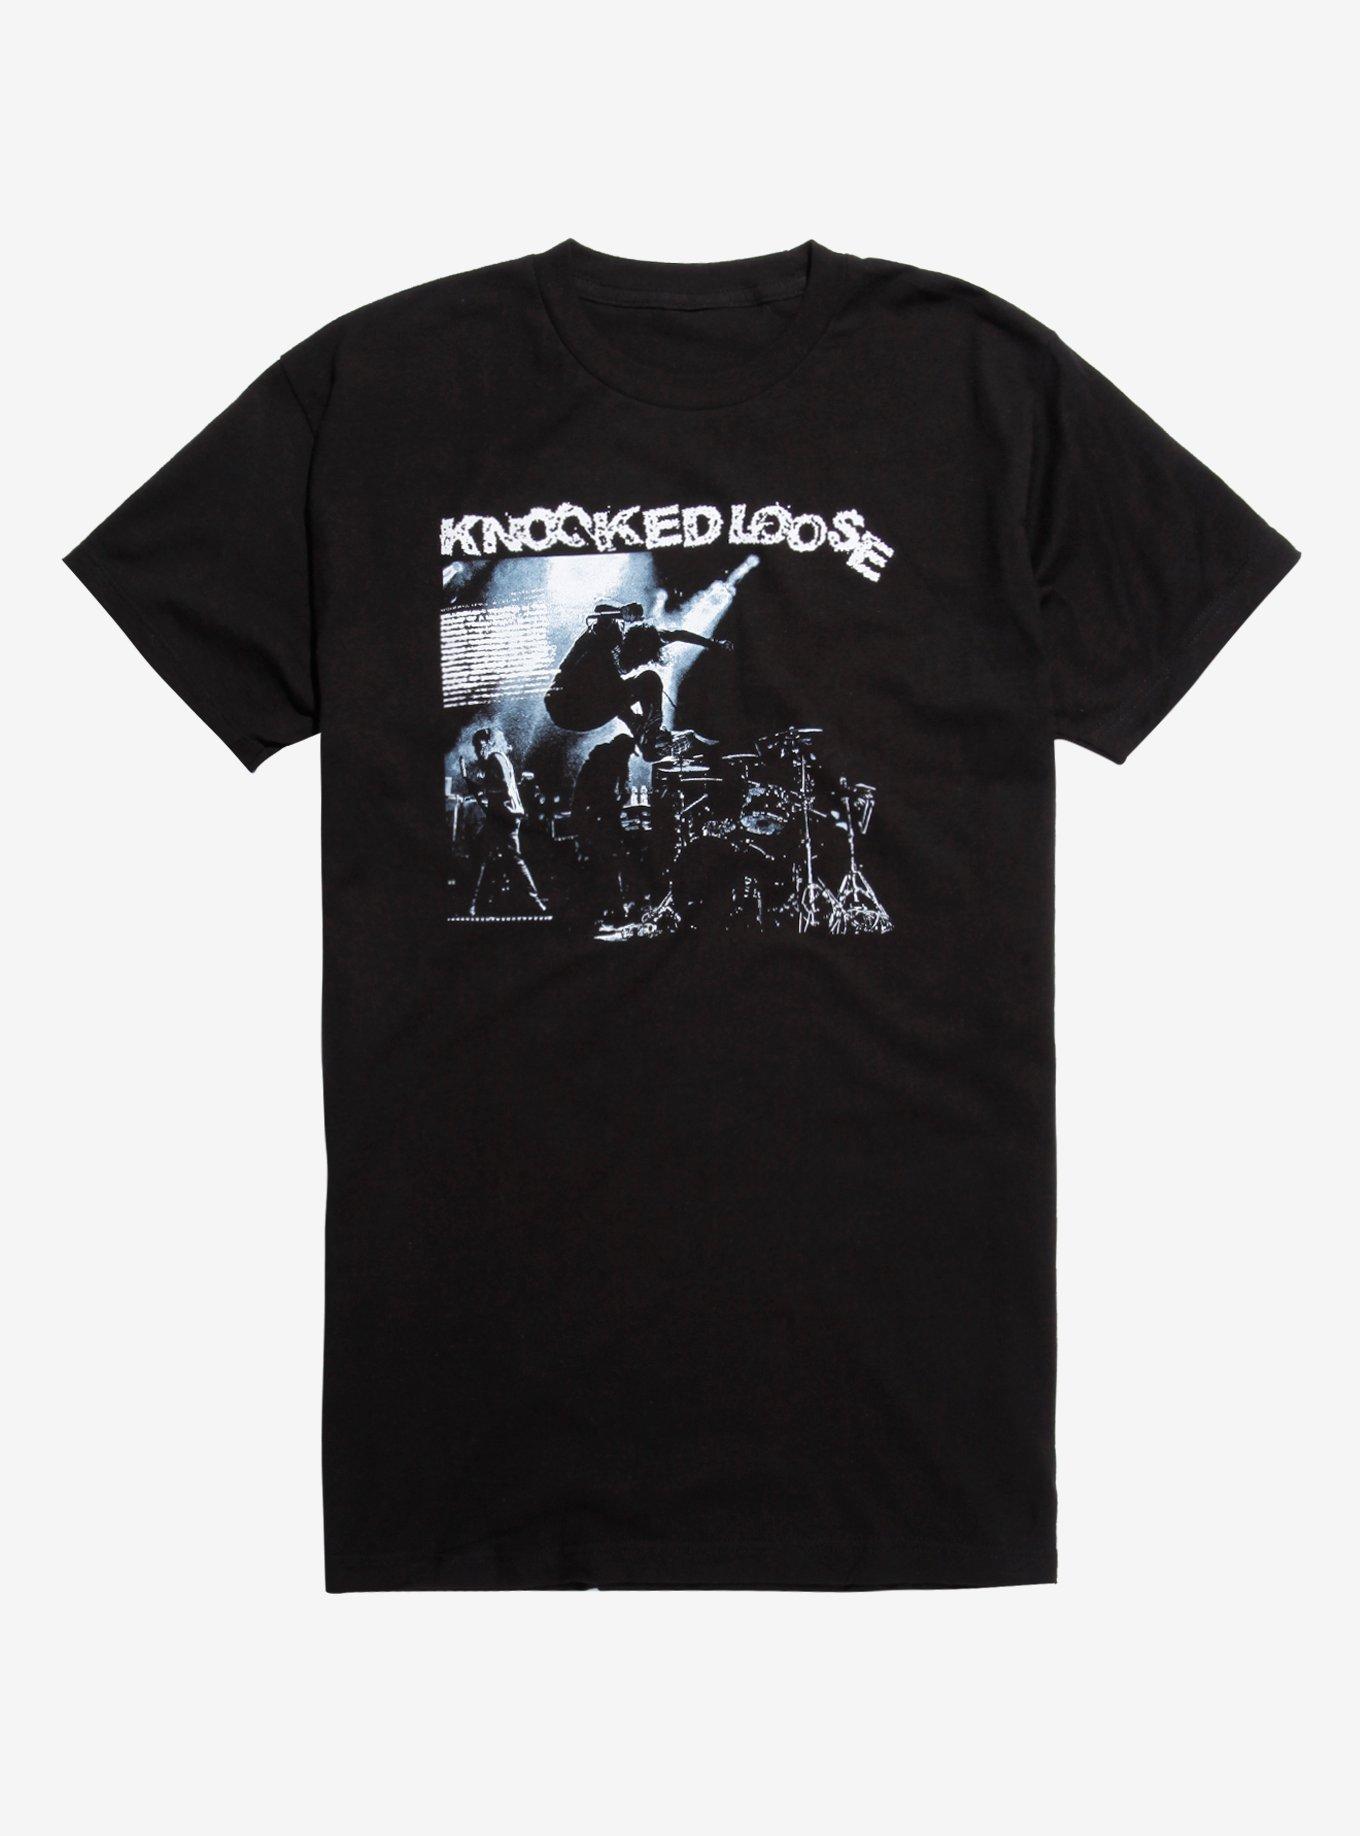 Knocked Loose Concert Photo T-Shirt | Hot Topic